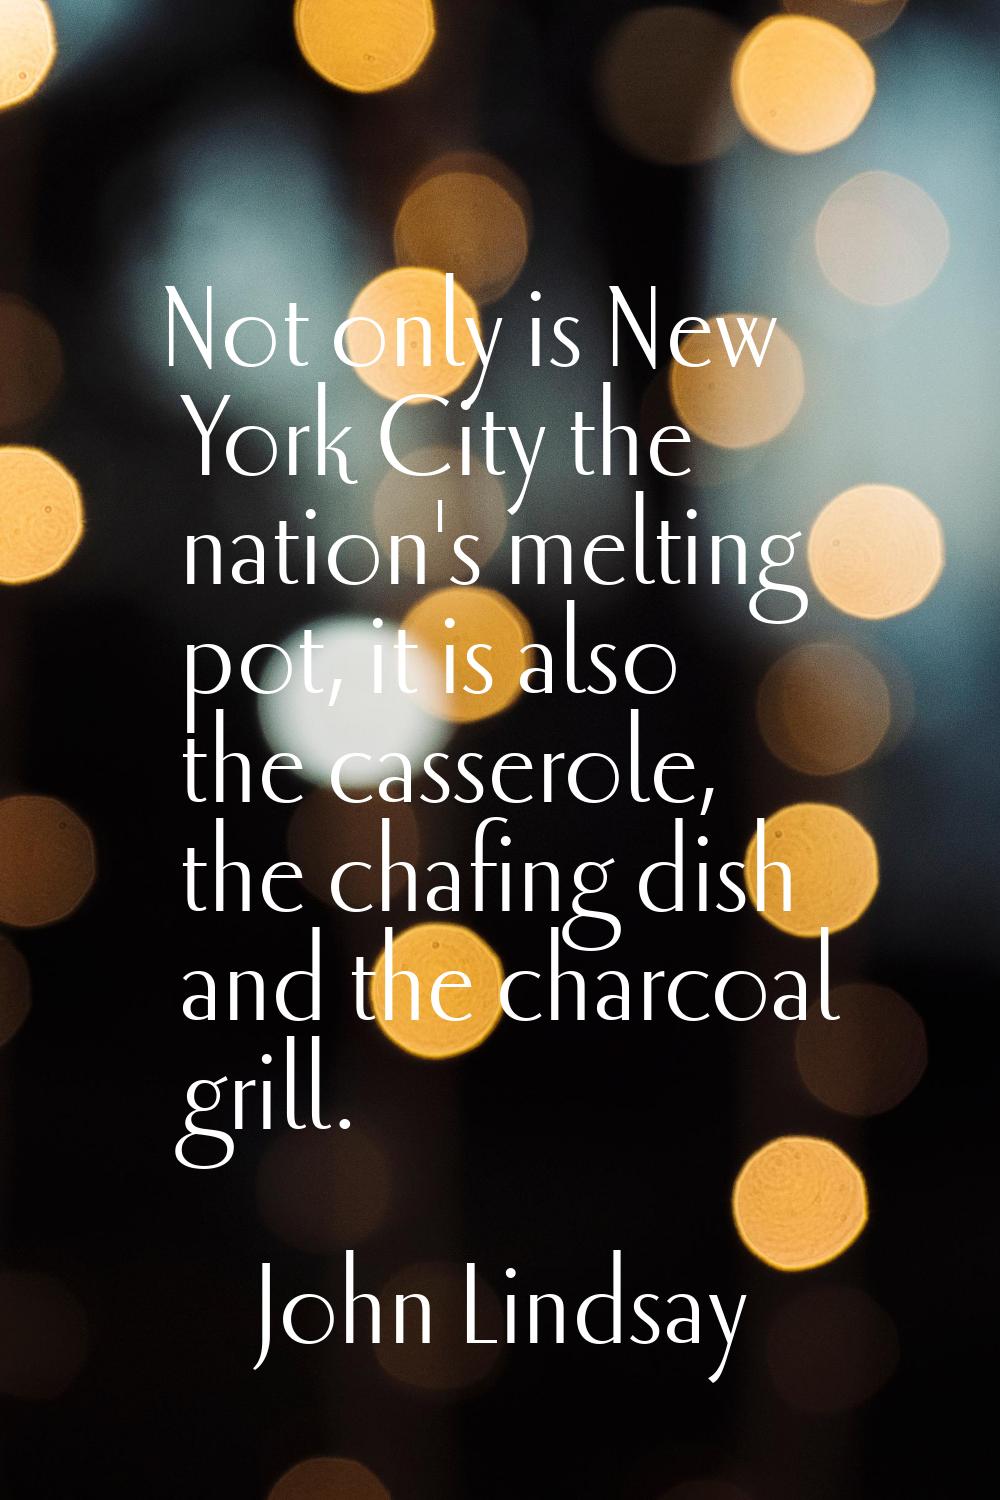 Not only is New York City the nation's melting pot, it is also the casserole, the chafing dish and 